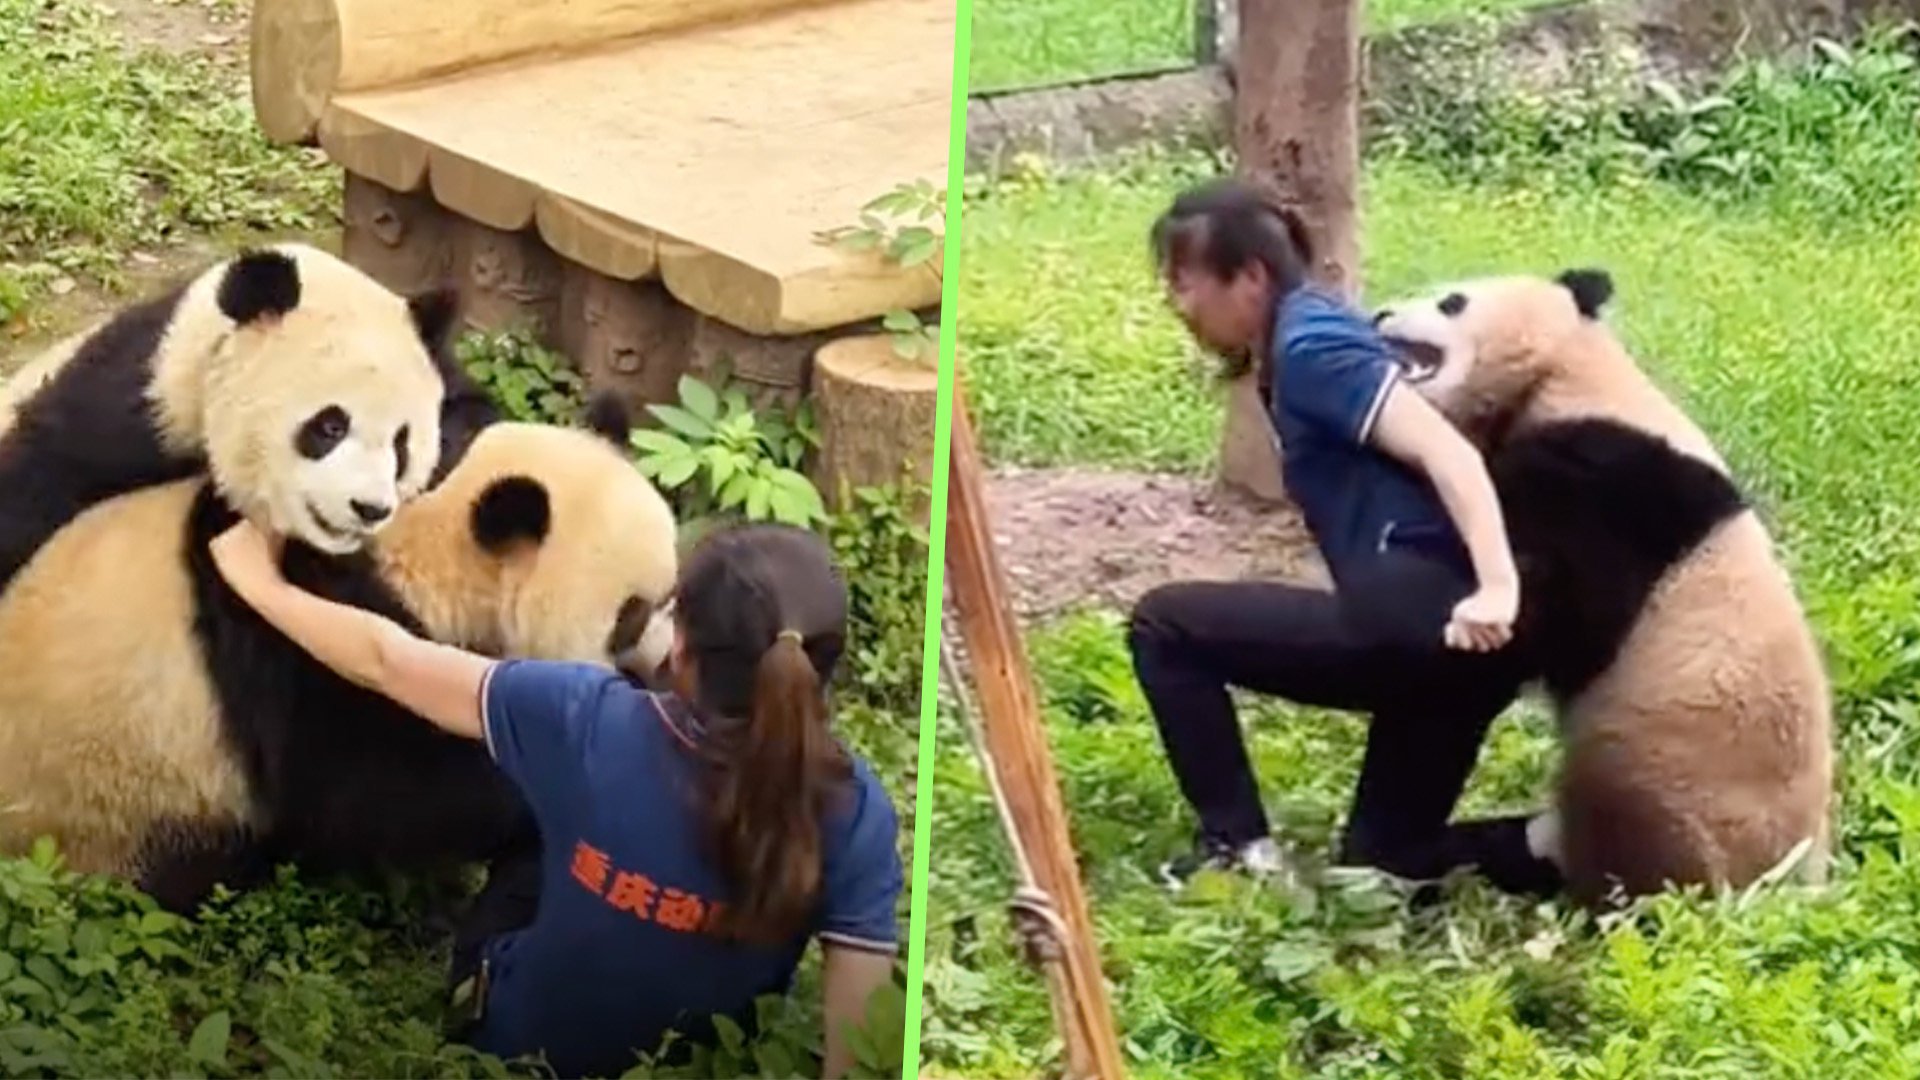 Pandas are widely seen as cute and cuddly, but a fresh incident in which a keeper was chased and bitten by one, has shown that caring for the big bears carries significant risk. Photo: SCMP composite/Douyin